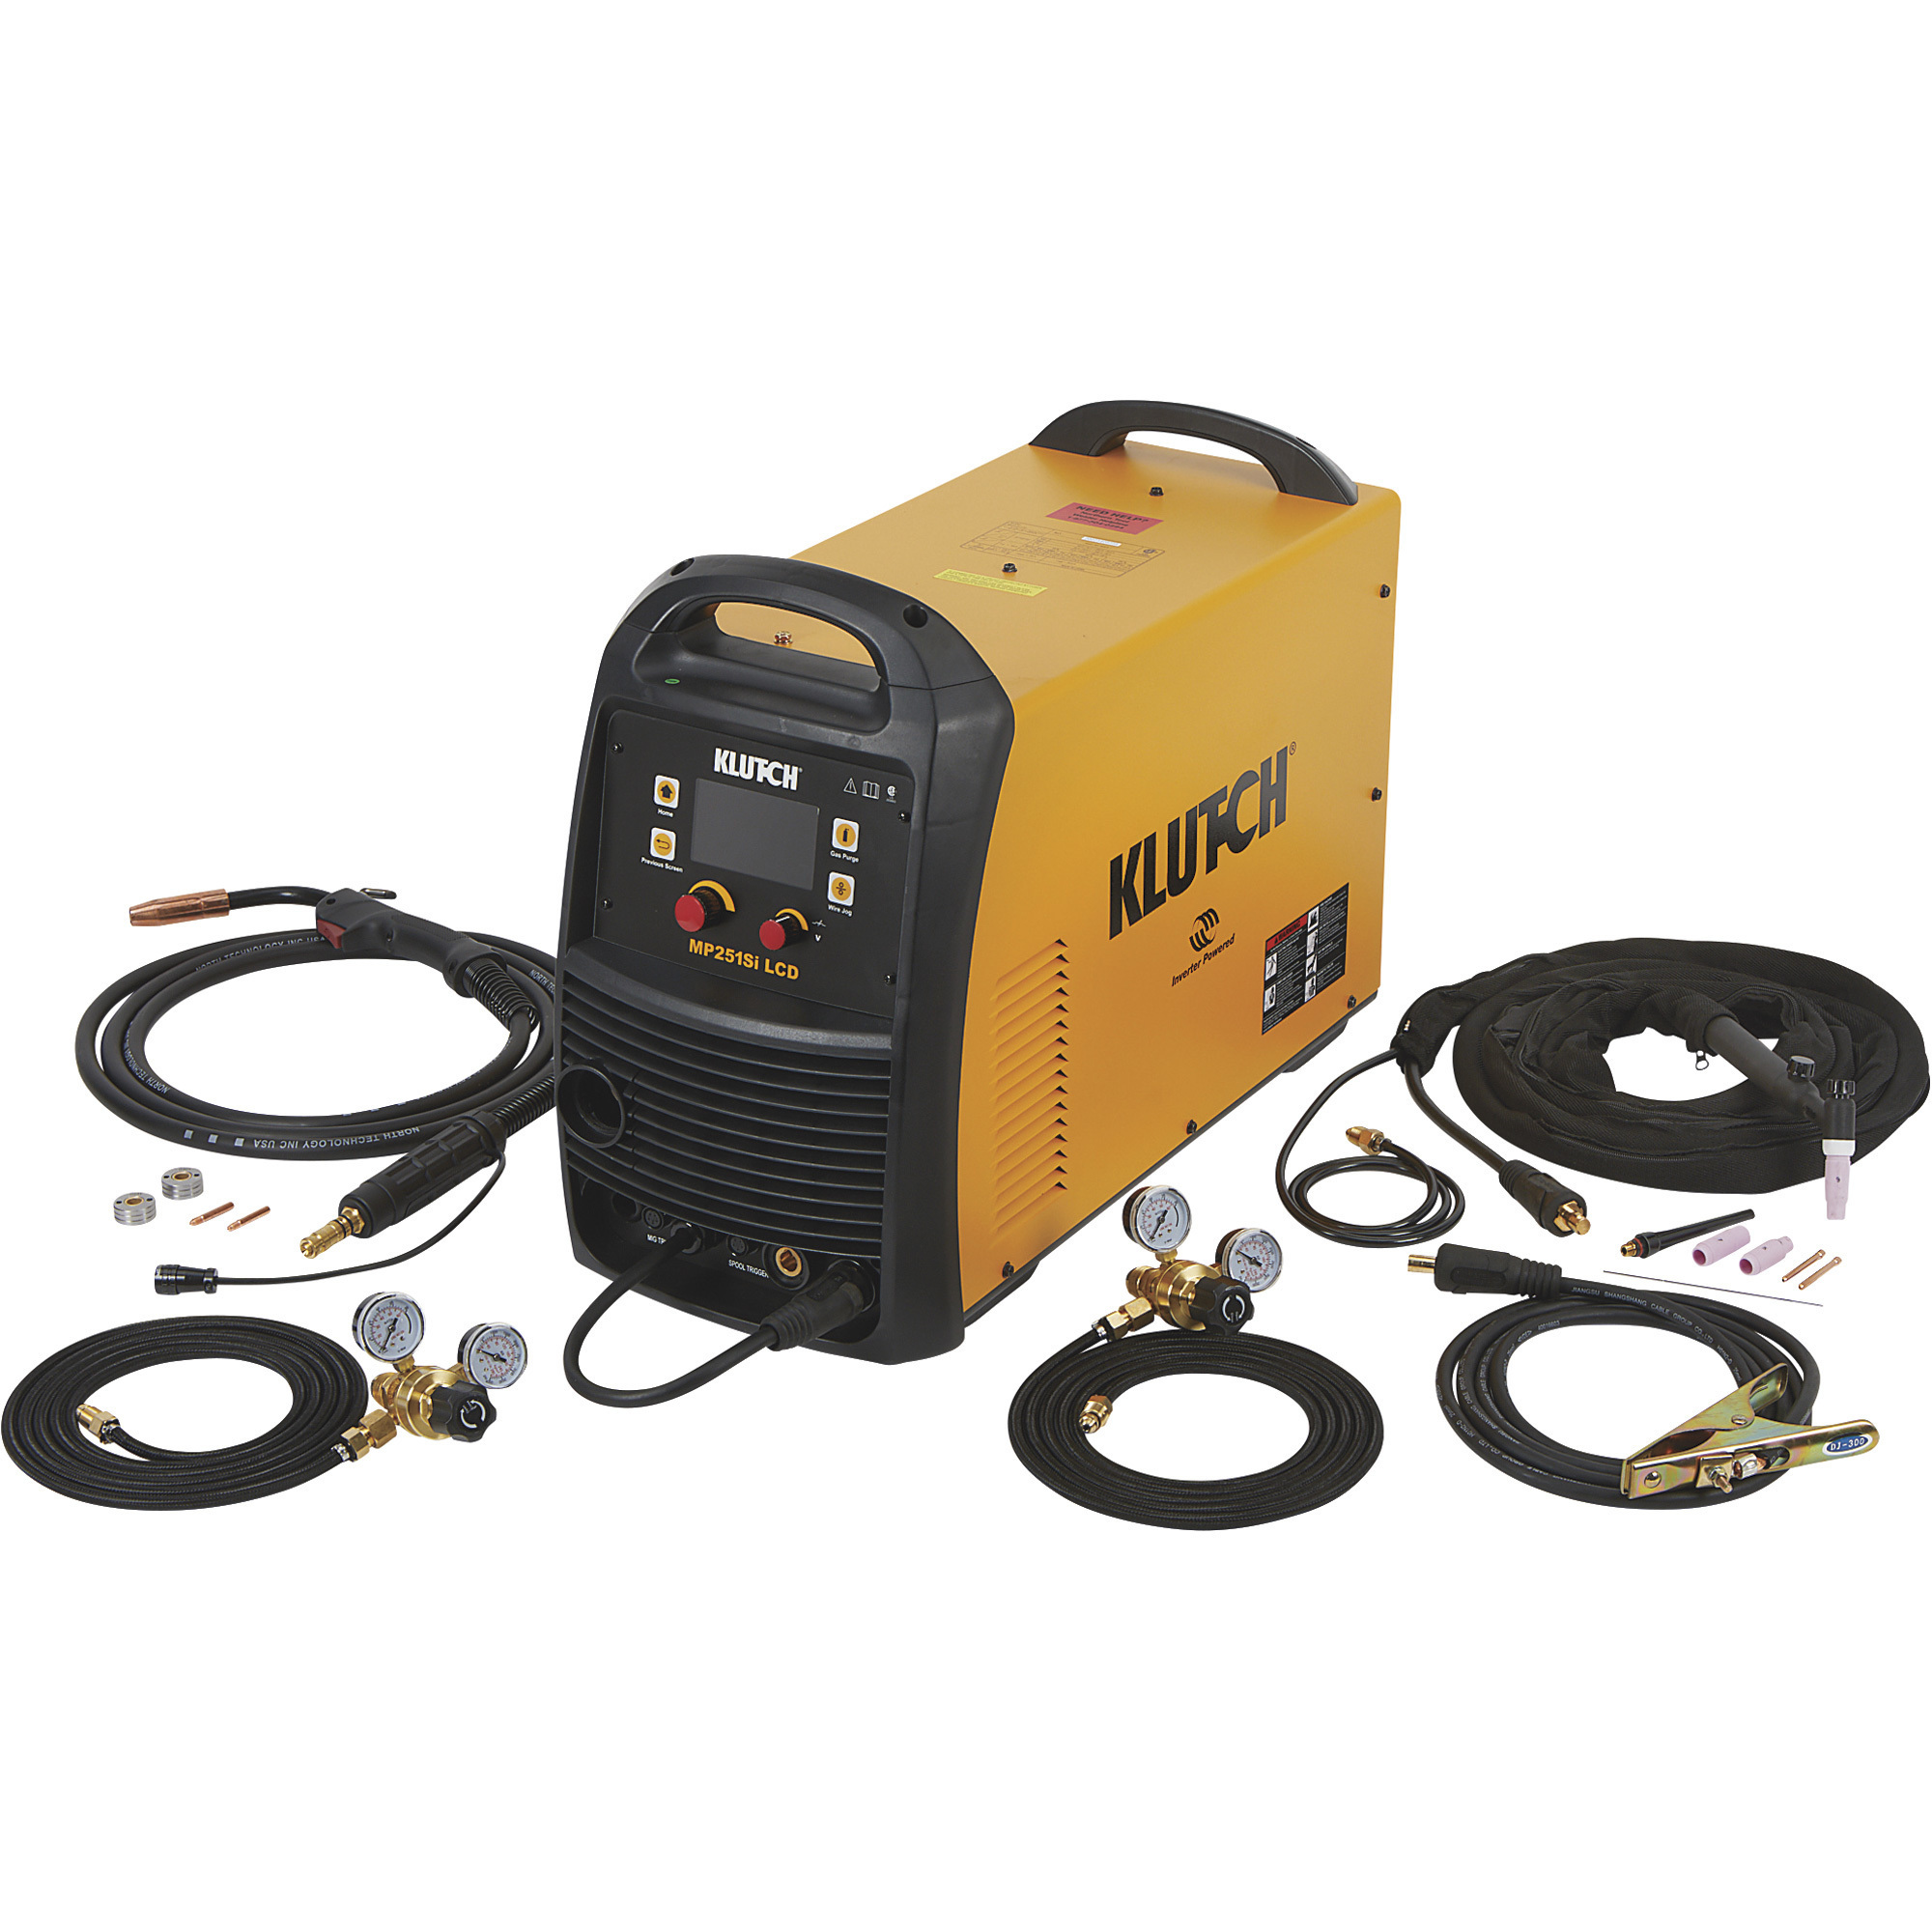 Klutch Inverter-Powered Multi-Process Welder with LCD, MIG Torch and Lift Start TIG Torch â Inverter, MIG, Flux-Core, Stick and TIG, 230V, 15â250